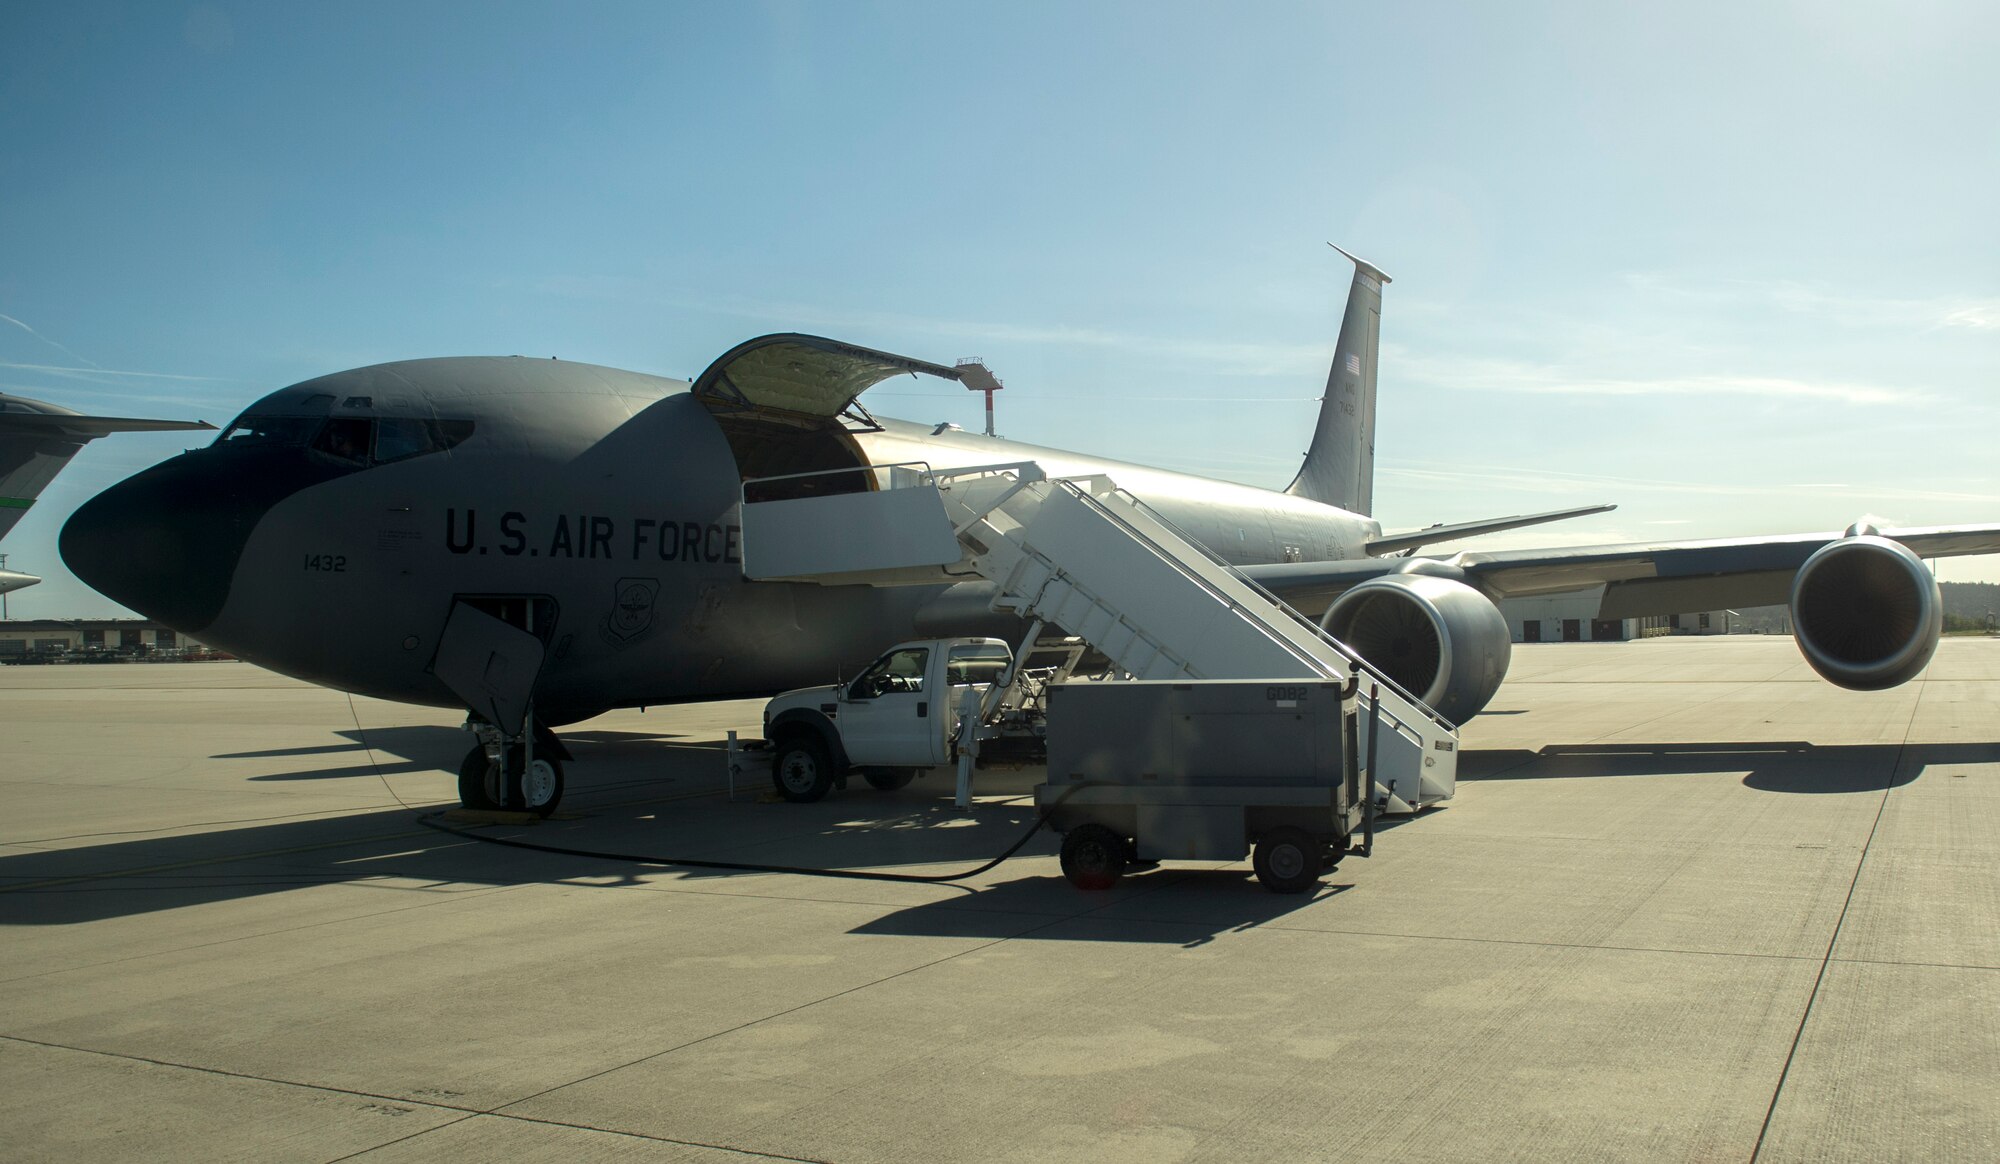 A U.S. Air Force KC-135 Stratotanker from the 191st Air Refueling Squadron, Roland R. Wright Air National Guard Base, Utah, awaits civic leader guests to board before a refueling mission at Spangdahlem Air Base, Germany, Sept. 26, 2016. The tanker arrived Sept. 17th to train with Spangdahlem’s F-16 Fighting Falcons, adding valuable training for air-to-air refueling. (U.S. Air Force photo/Airman 1st Class Preston Cherry)